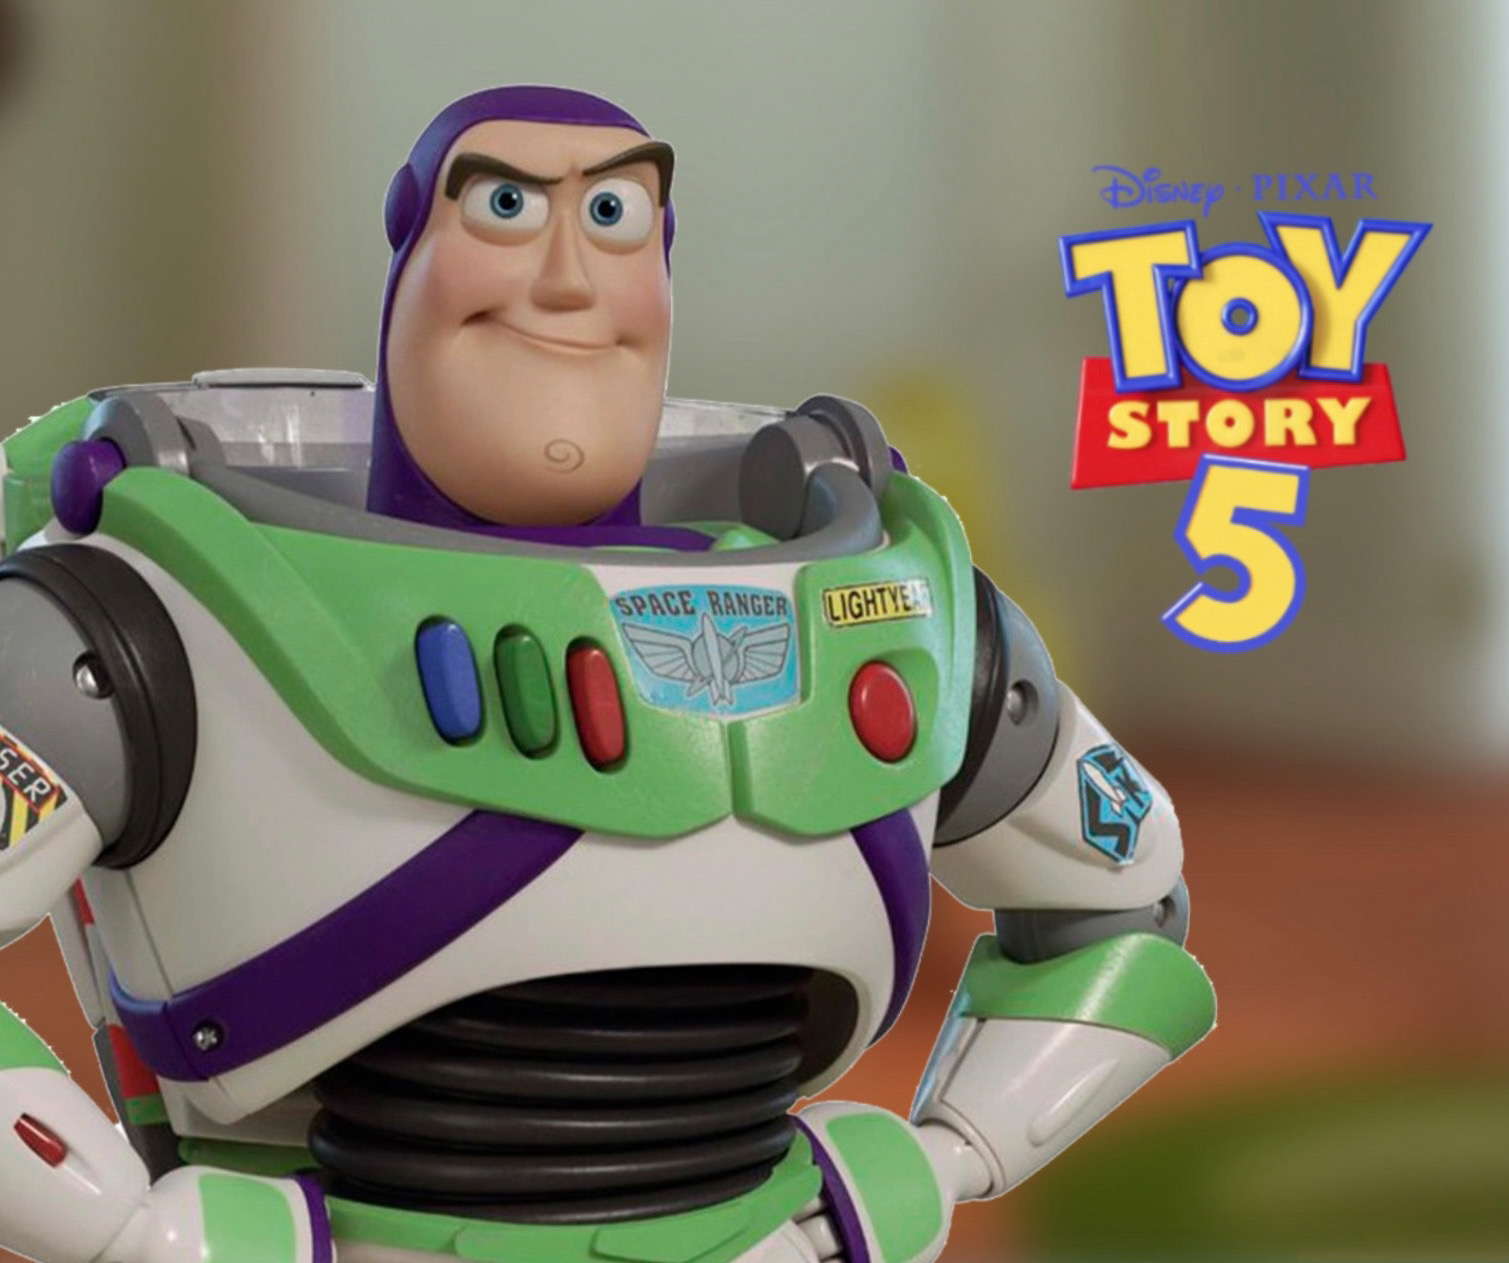 My 'Toy Story 4' Thoughts – Toy Story Fangirl